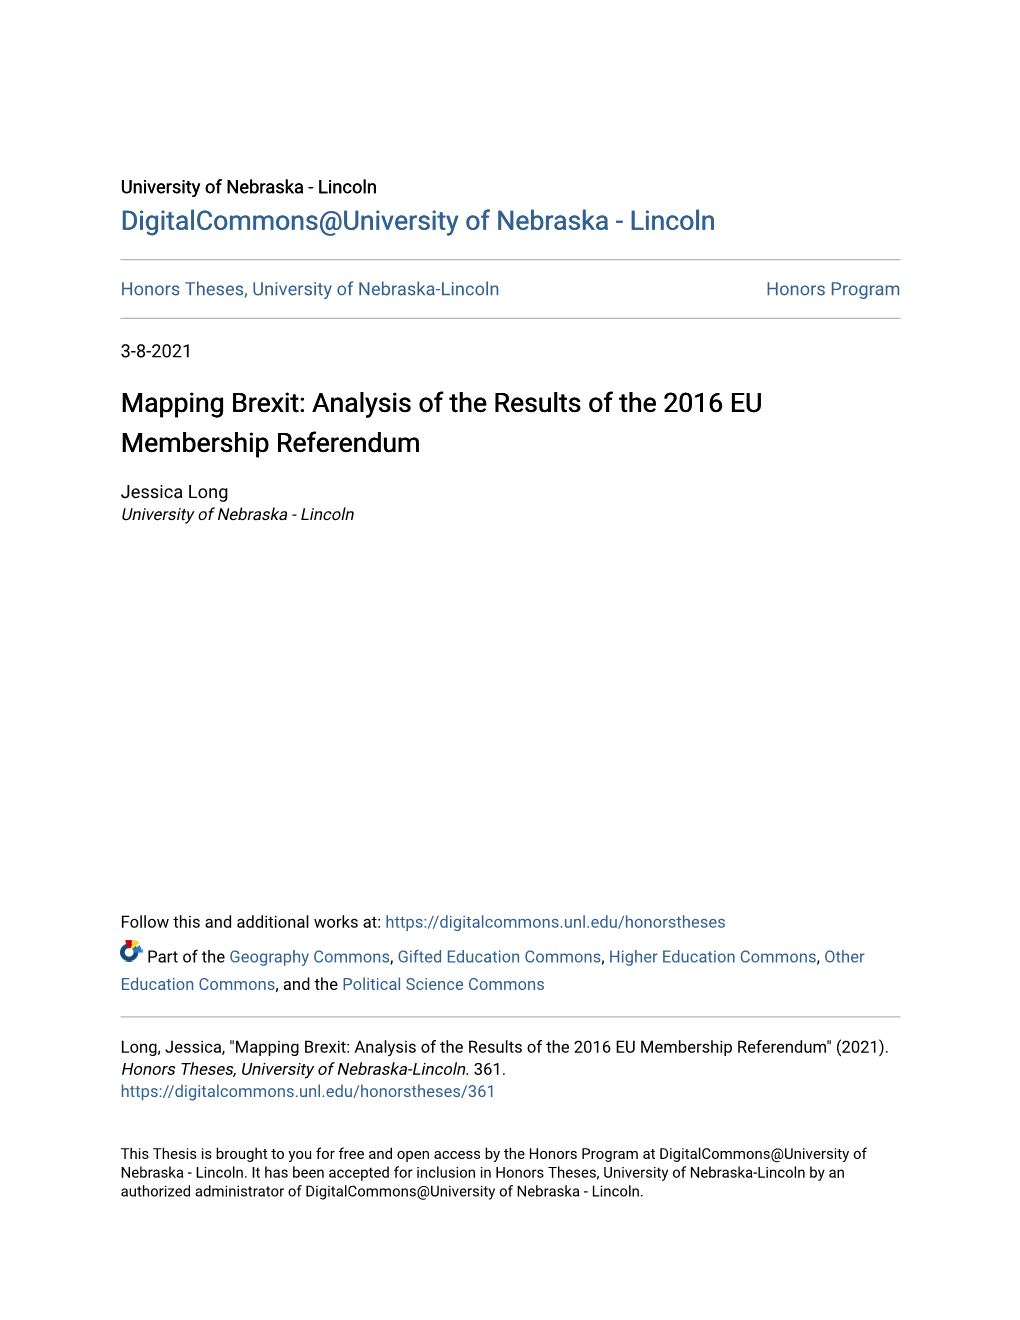 Mapping Brexit: Analysis of the Results of the 2016 EU Membership Referendum